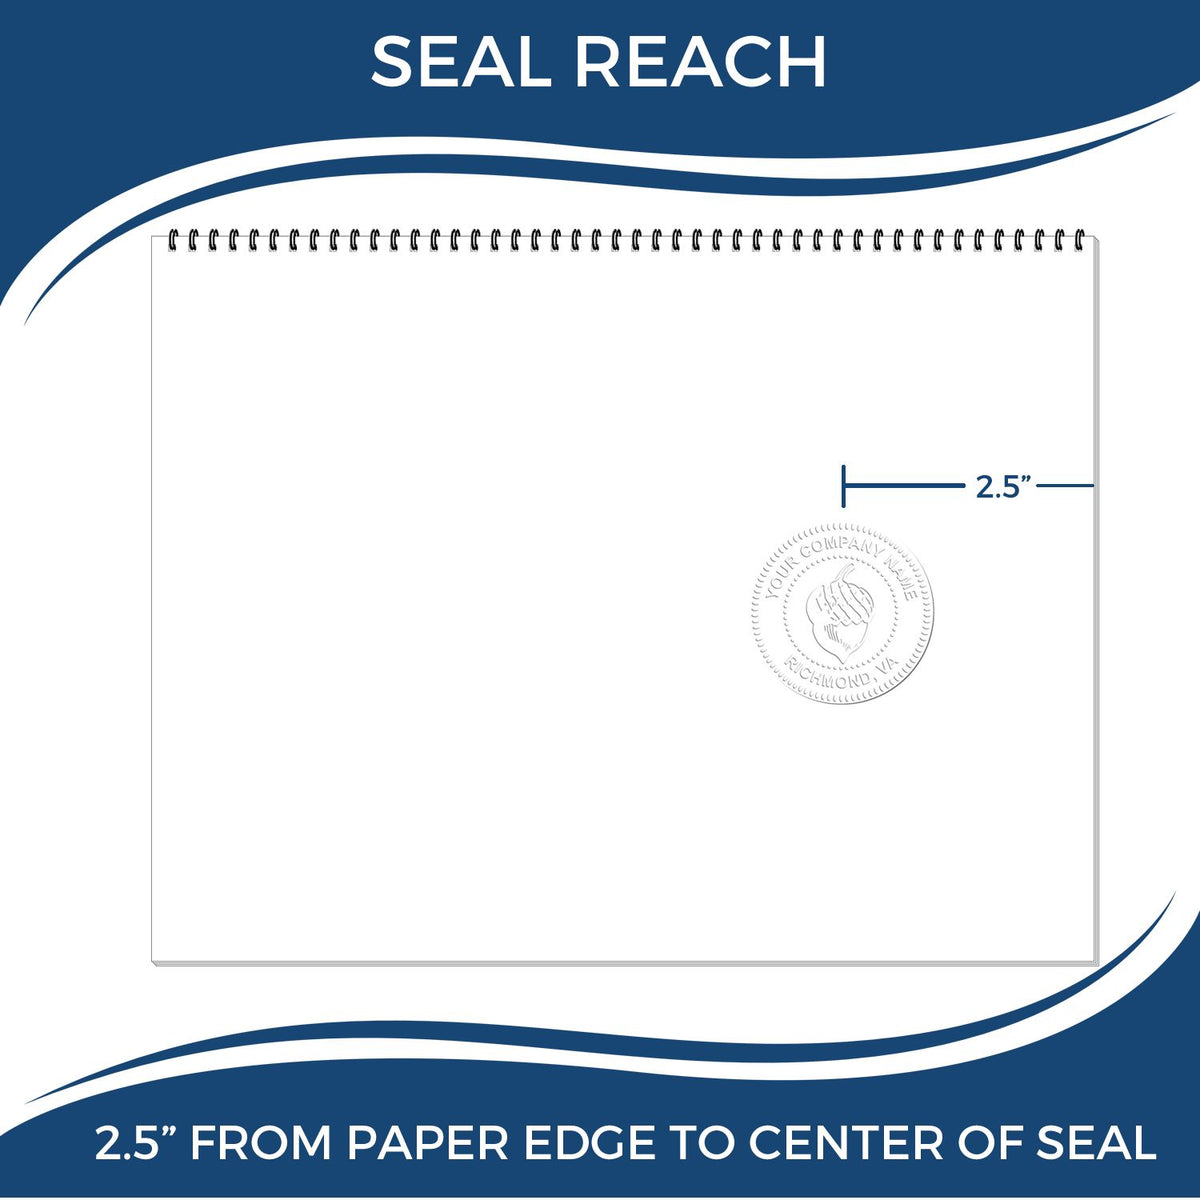 An infographic showing the seal reach which is represented by a ruler and a miniature seal image of the Heavy Duty Cast Iron Pennsylvania Architect Embosser